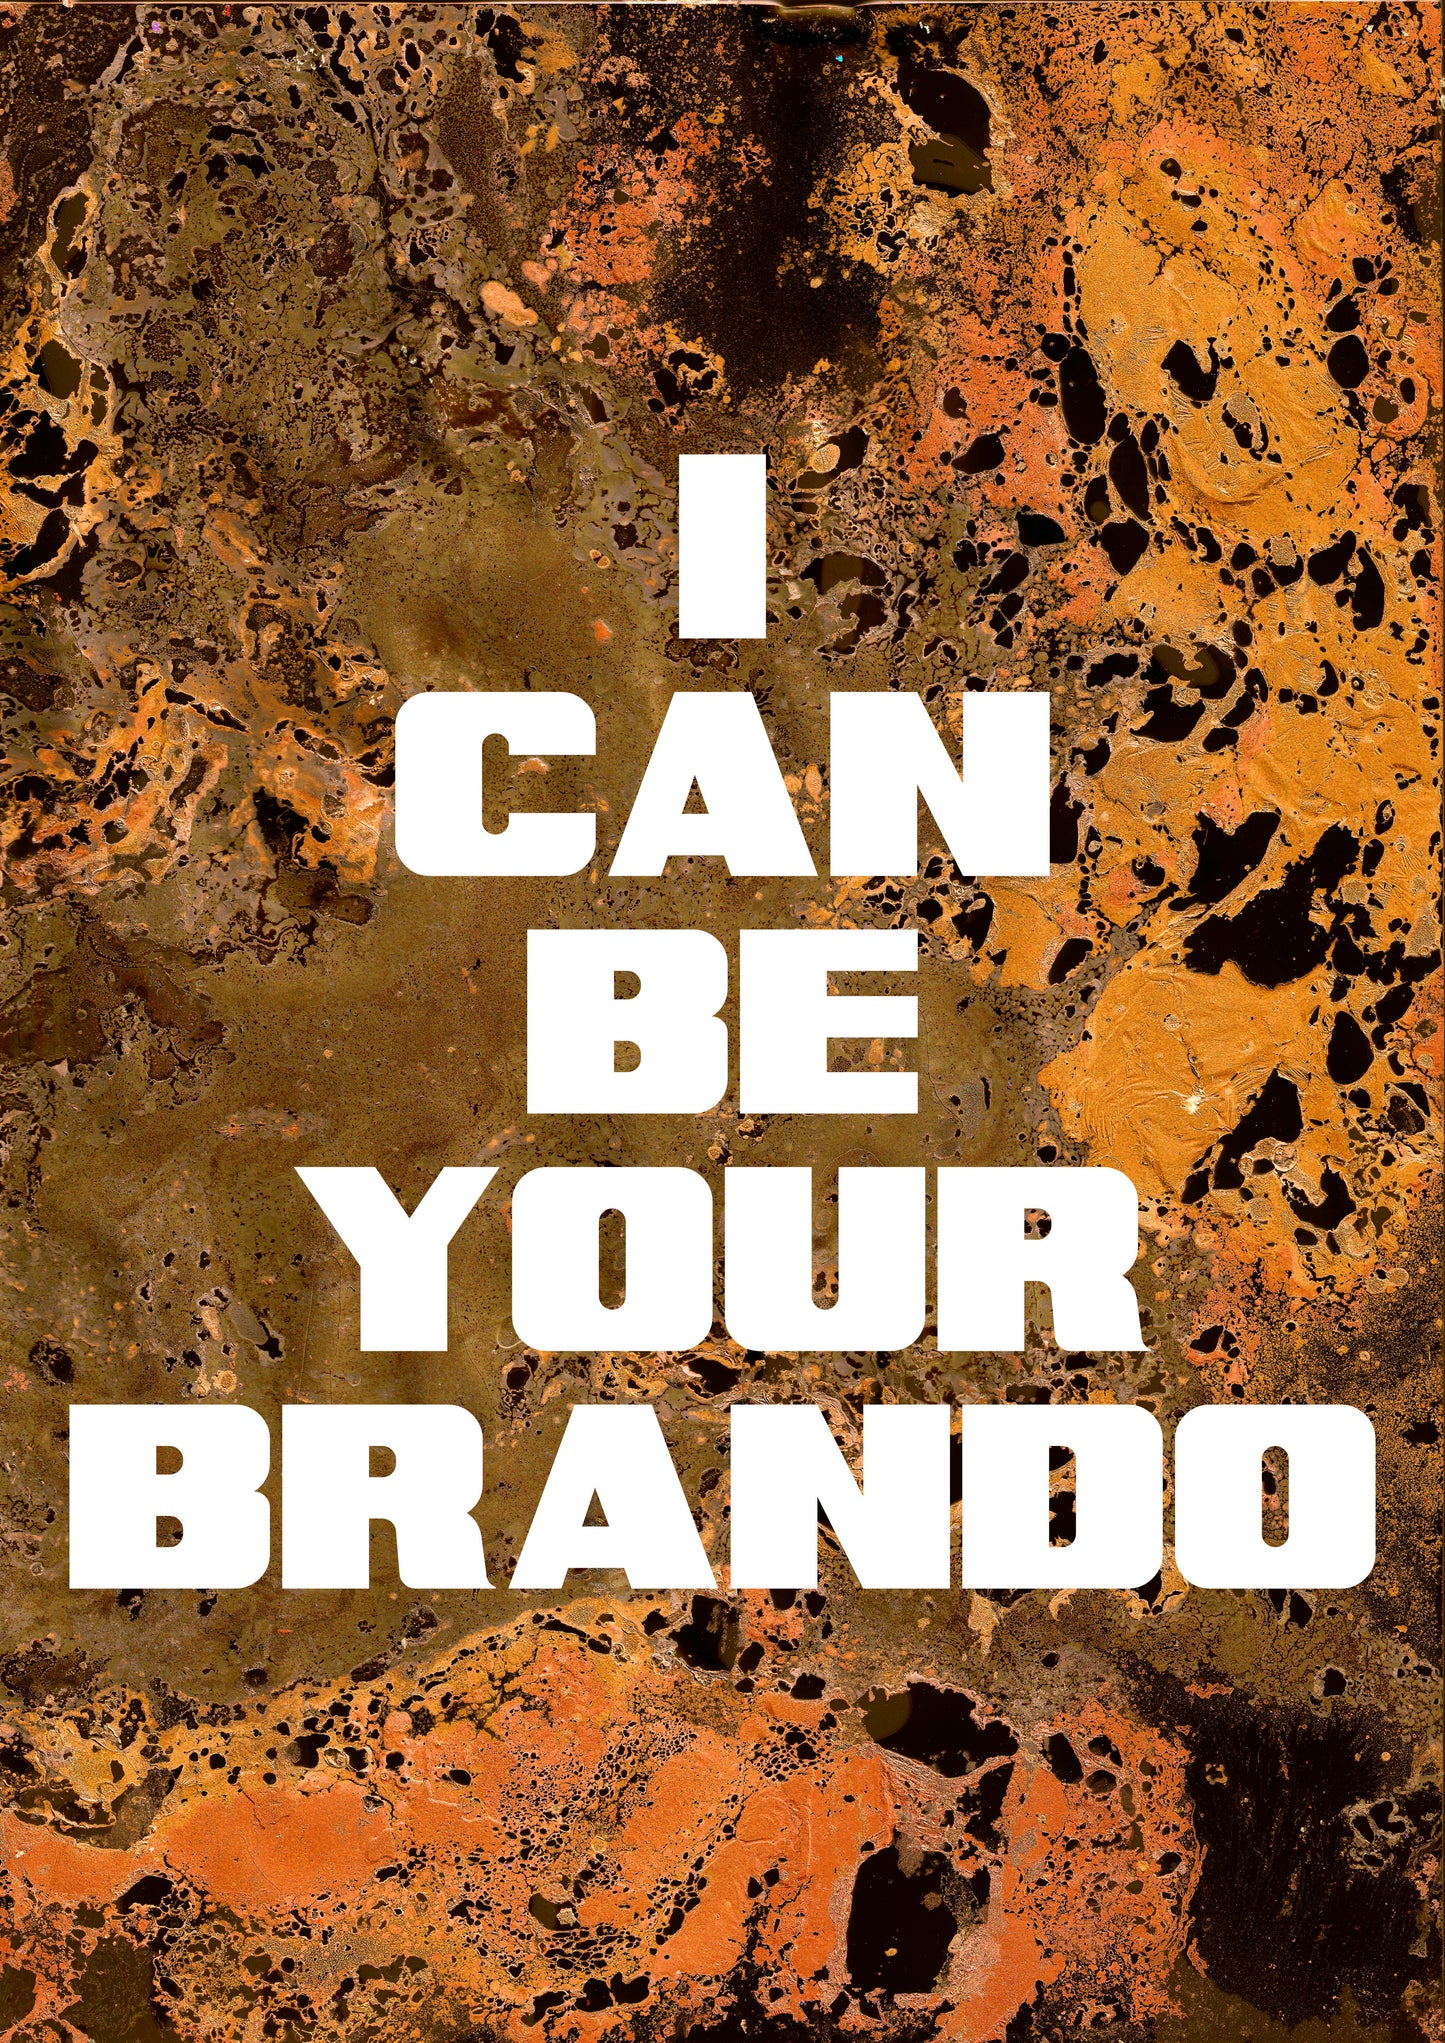 I CAN BE YOUR BRANDO